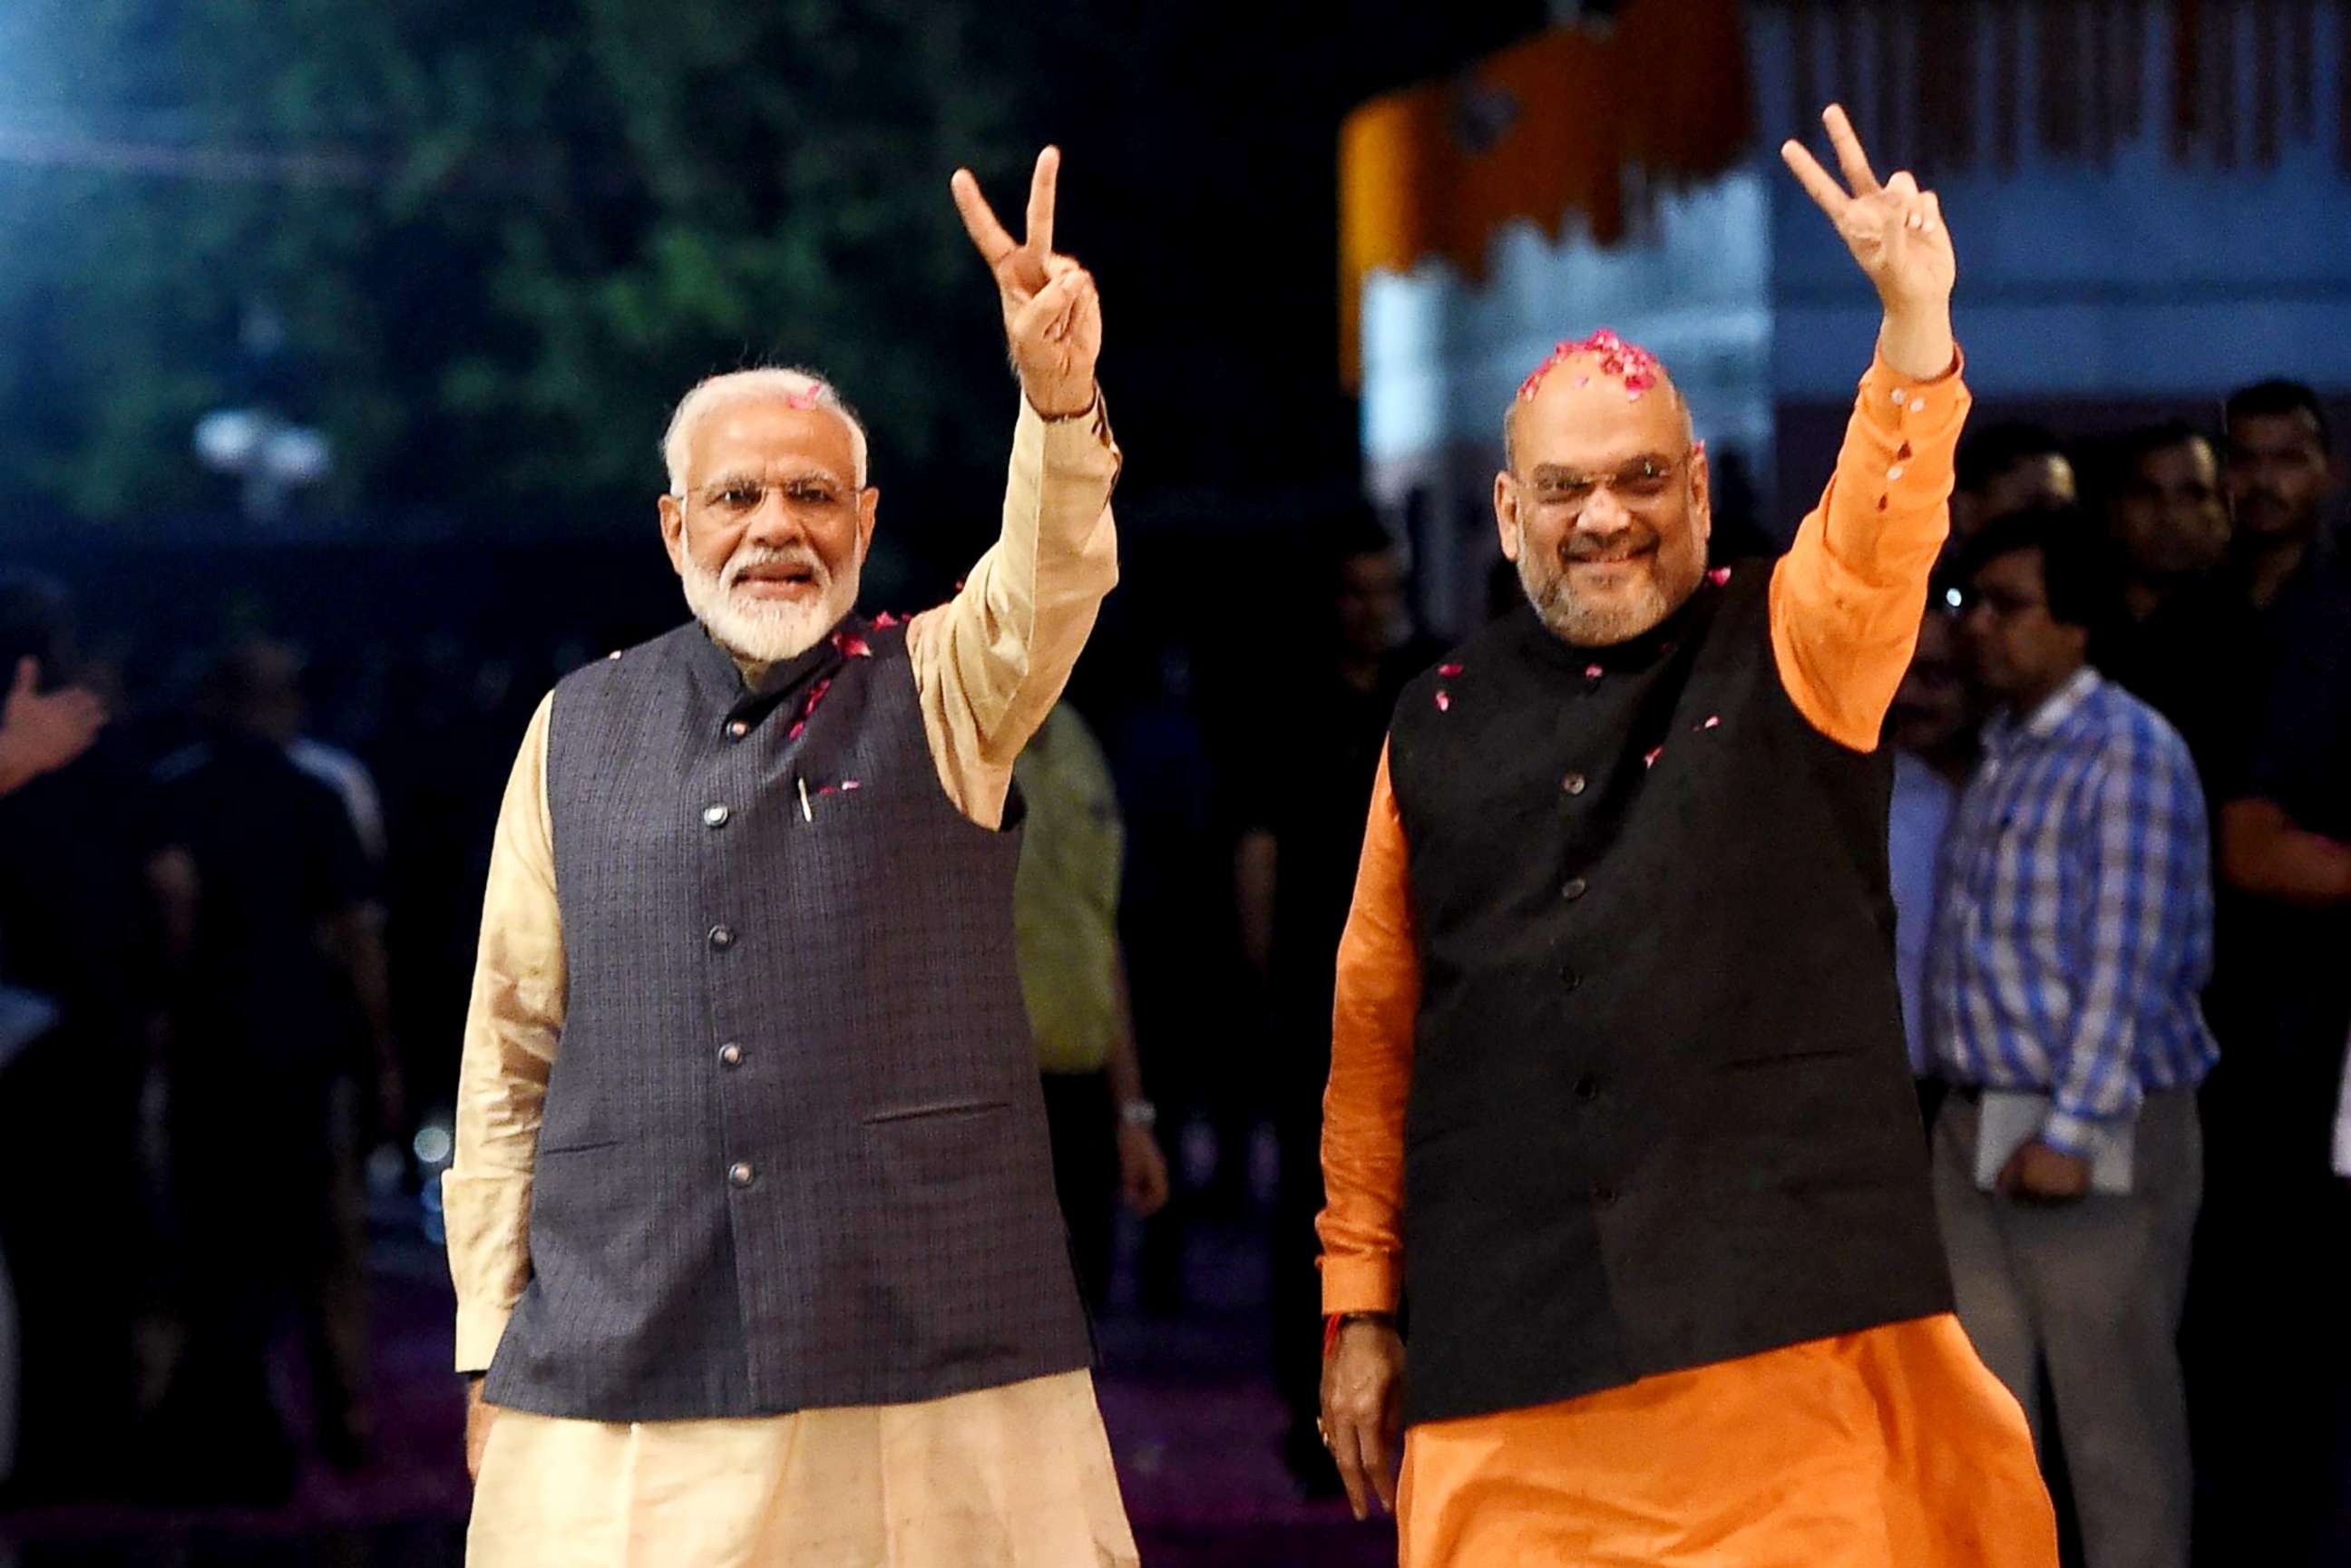 PHOTO: Indian Prime Minister Narendra Modi (left) and president of the ruling Bharatiya Janata Party (BJP) Amit Shah gesture as they celebrate the victory in India's general elections, in New Delhi on May 23, 2019.